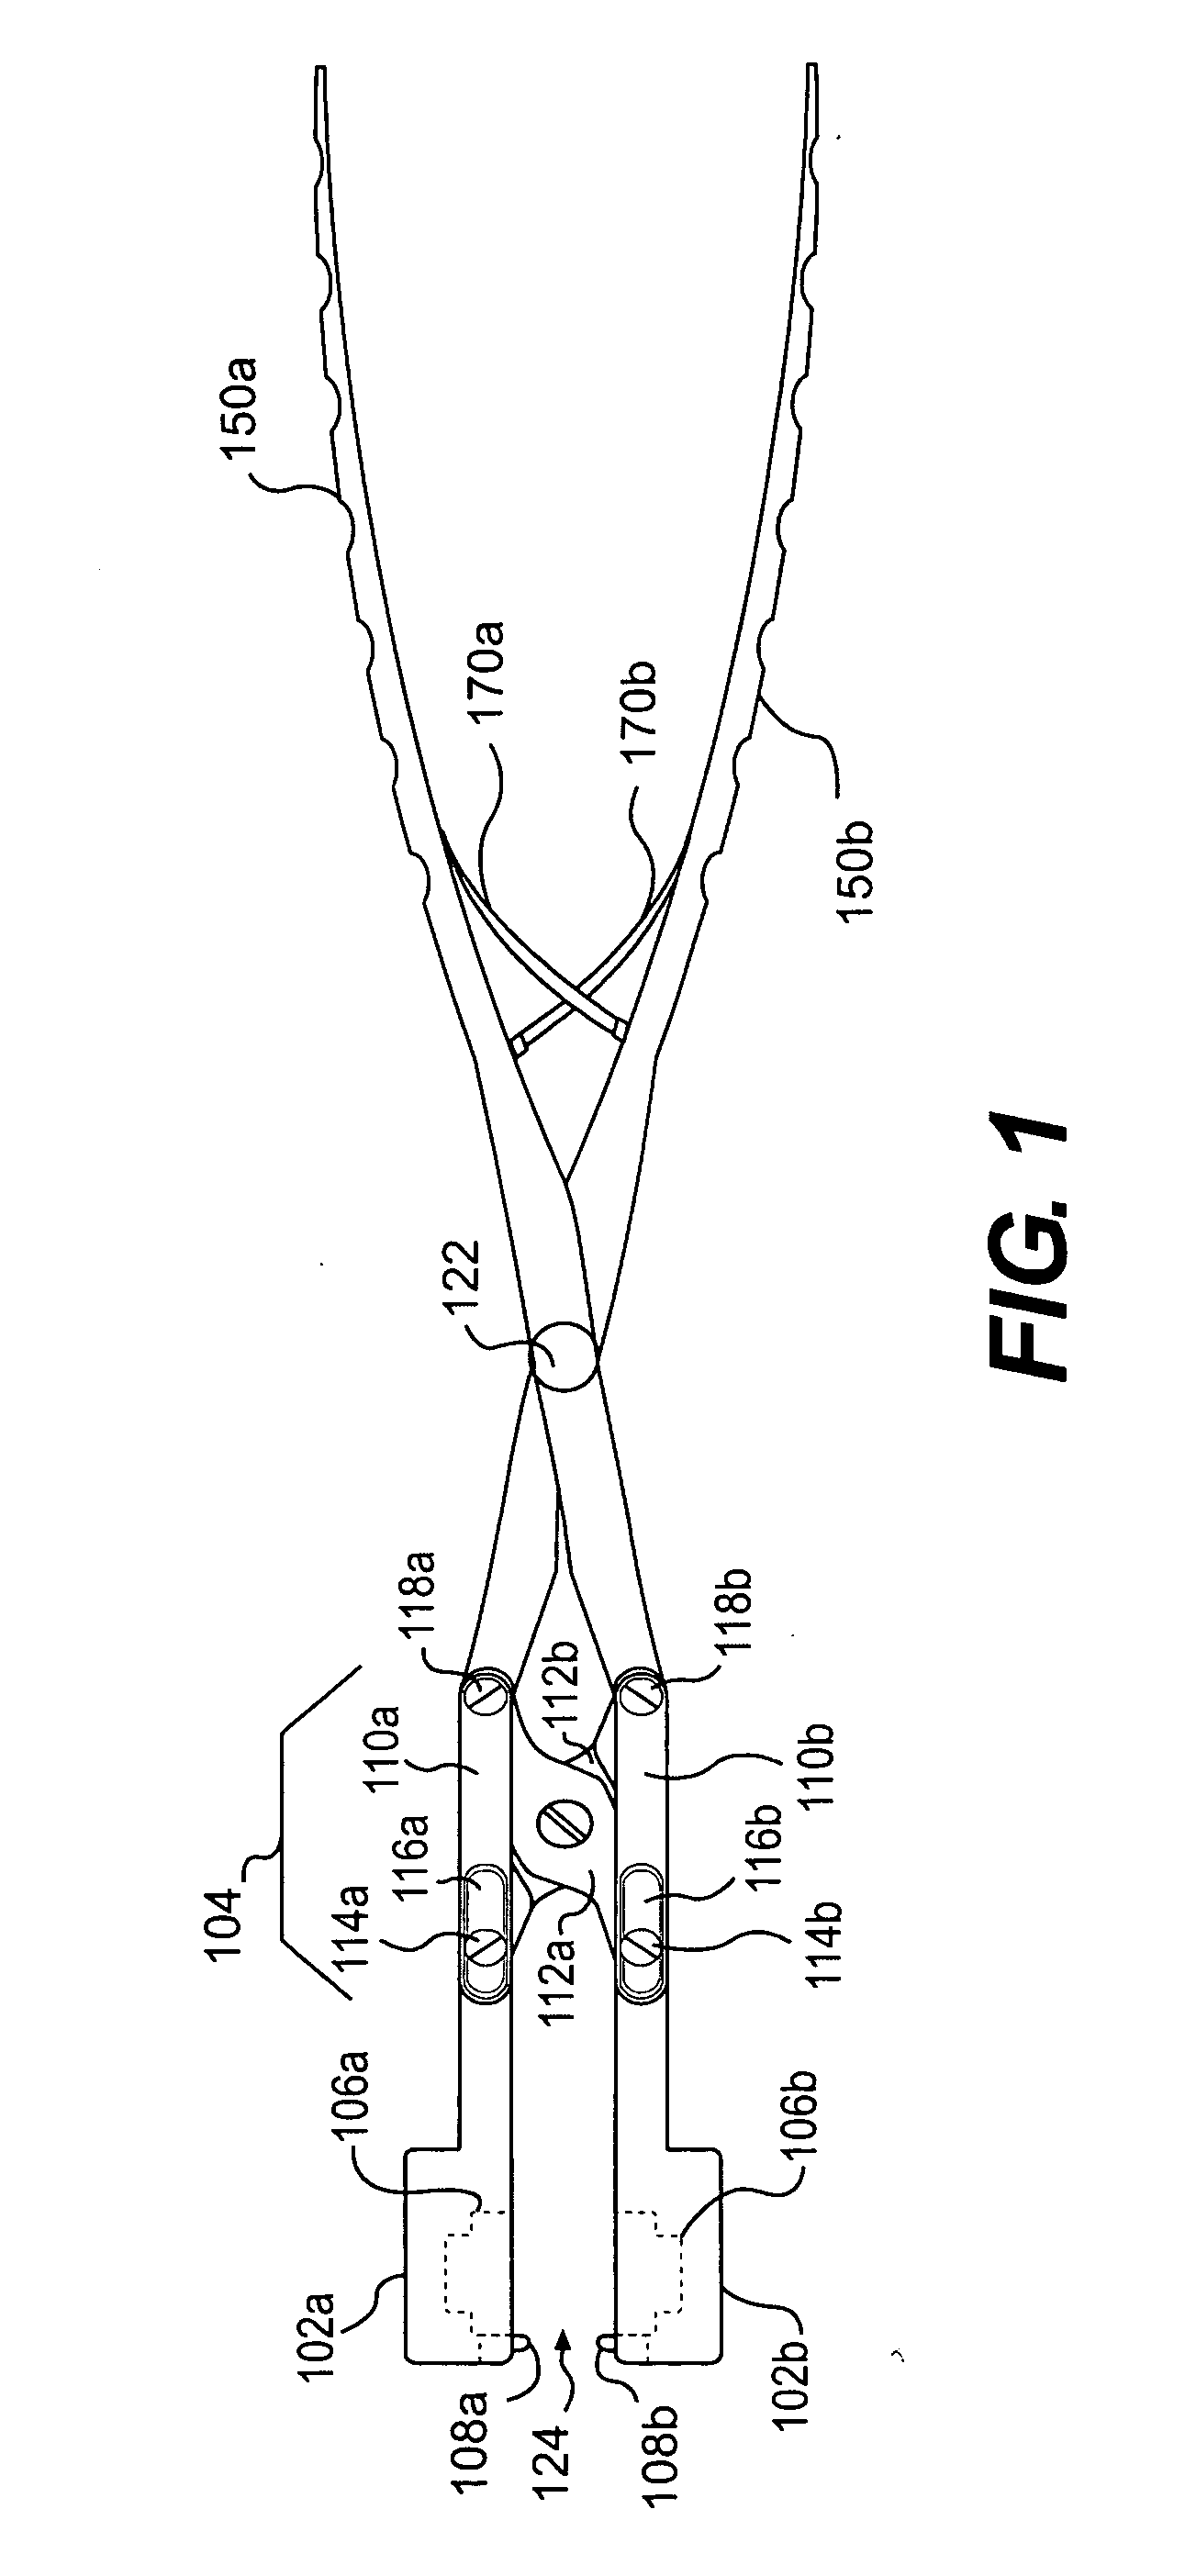 Compression device and method for shape memory alloy implants